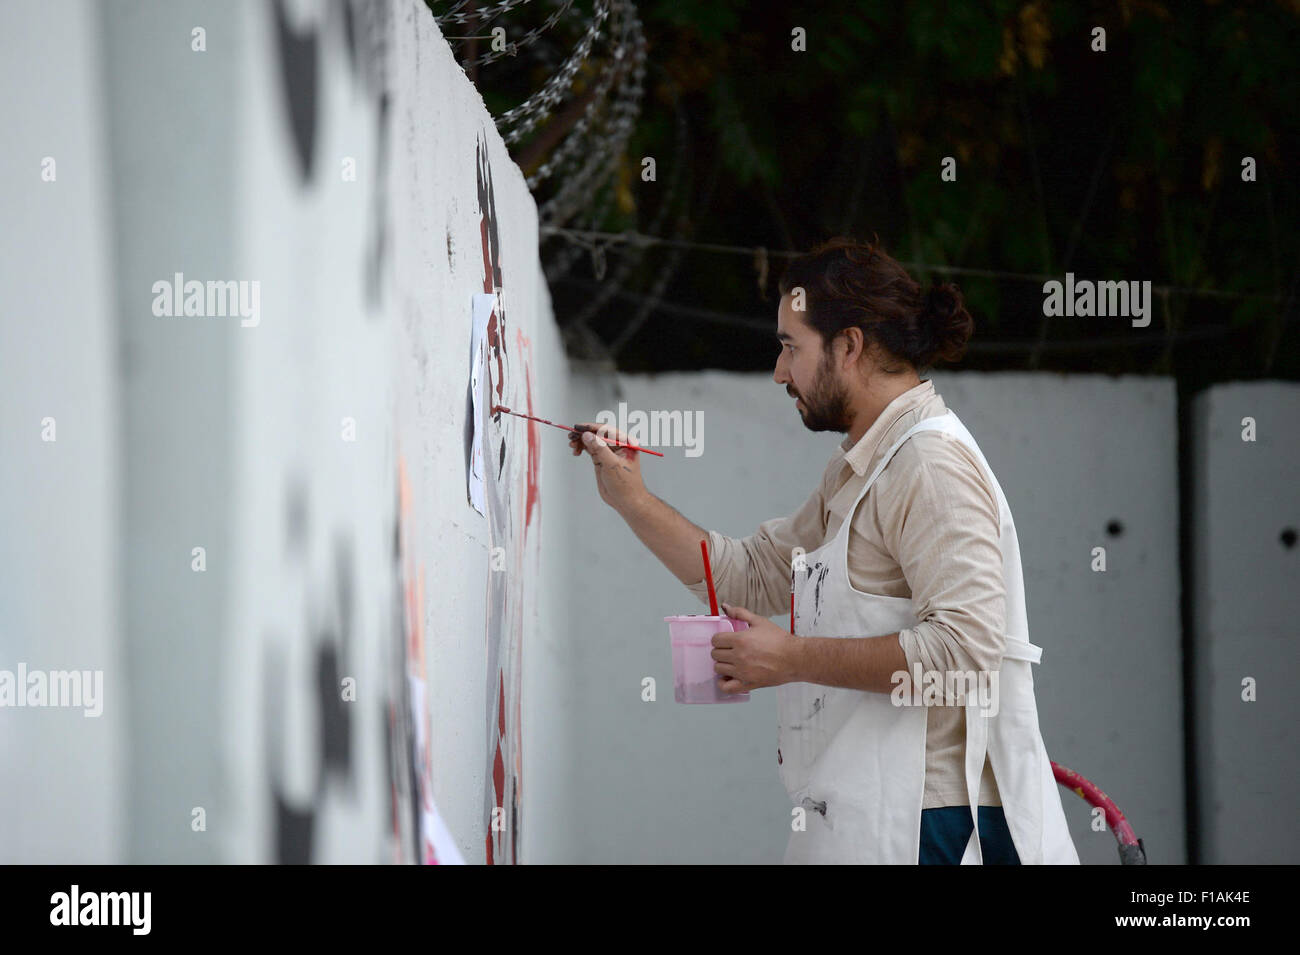 Civil society activist Omaid Sharifi paints graffiti on a cement blast wall in Kabul (Afghanistan), 15 August 2015). They are part of the self-style 'Artlords of Kabul,' a mixed-bag of artists and activists on a mission to claim their city back, by adorning the high security walls across Kabul with eye-catching graffiti images and simple messages. The artwork, titled an ordinary hero - the hero of my city, is a tribute to street sweepers on the wall that protects the Afghan Central Bank building. So far, the group has painted outside the presidential palace, as well as the headquarters of nati Stock Photo